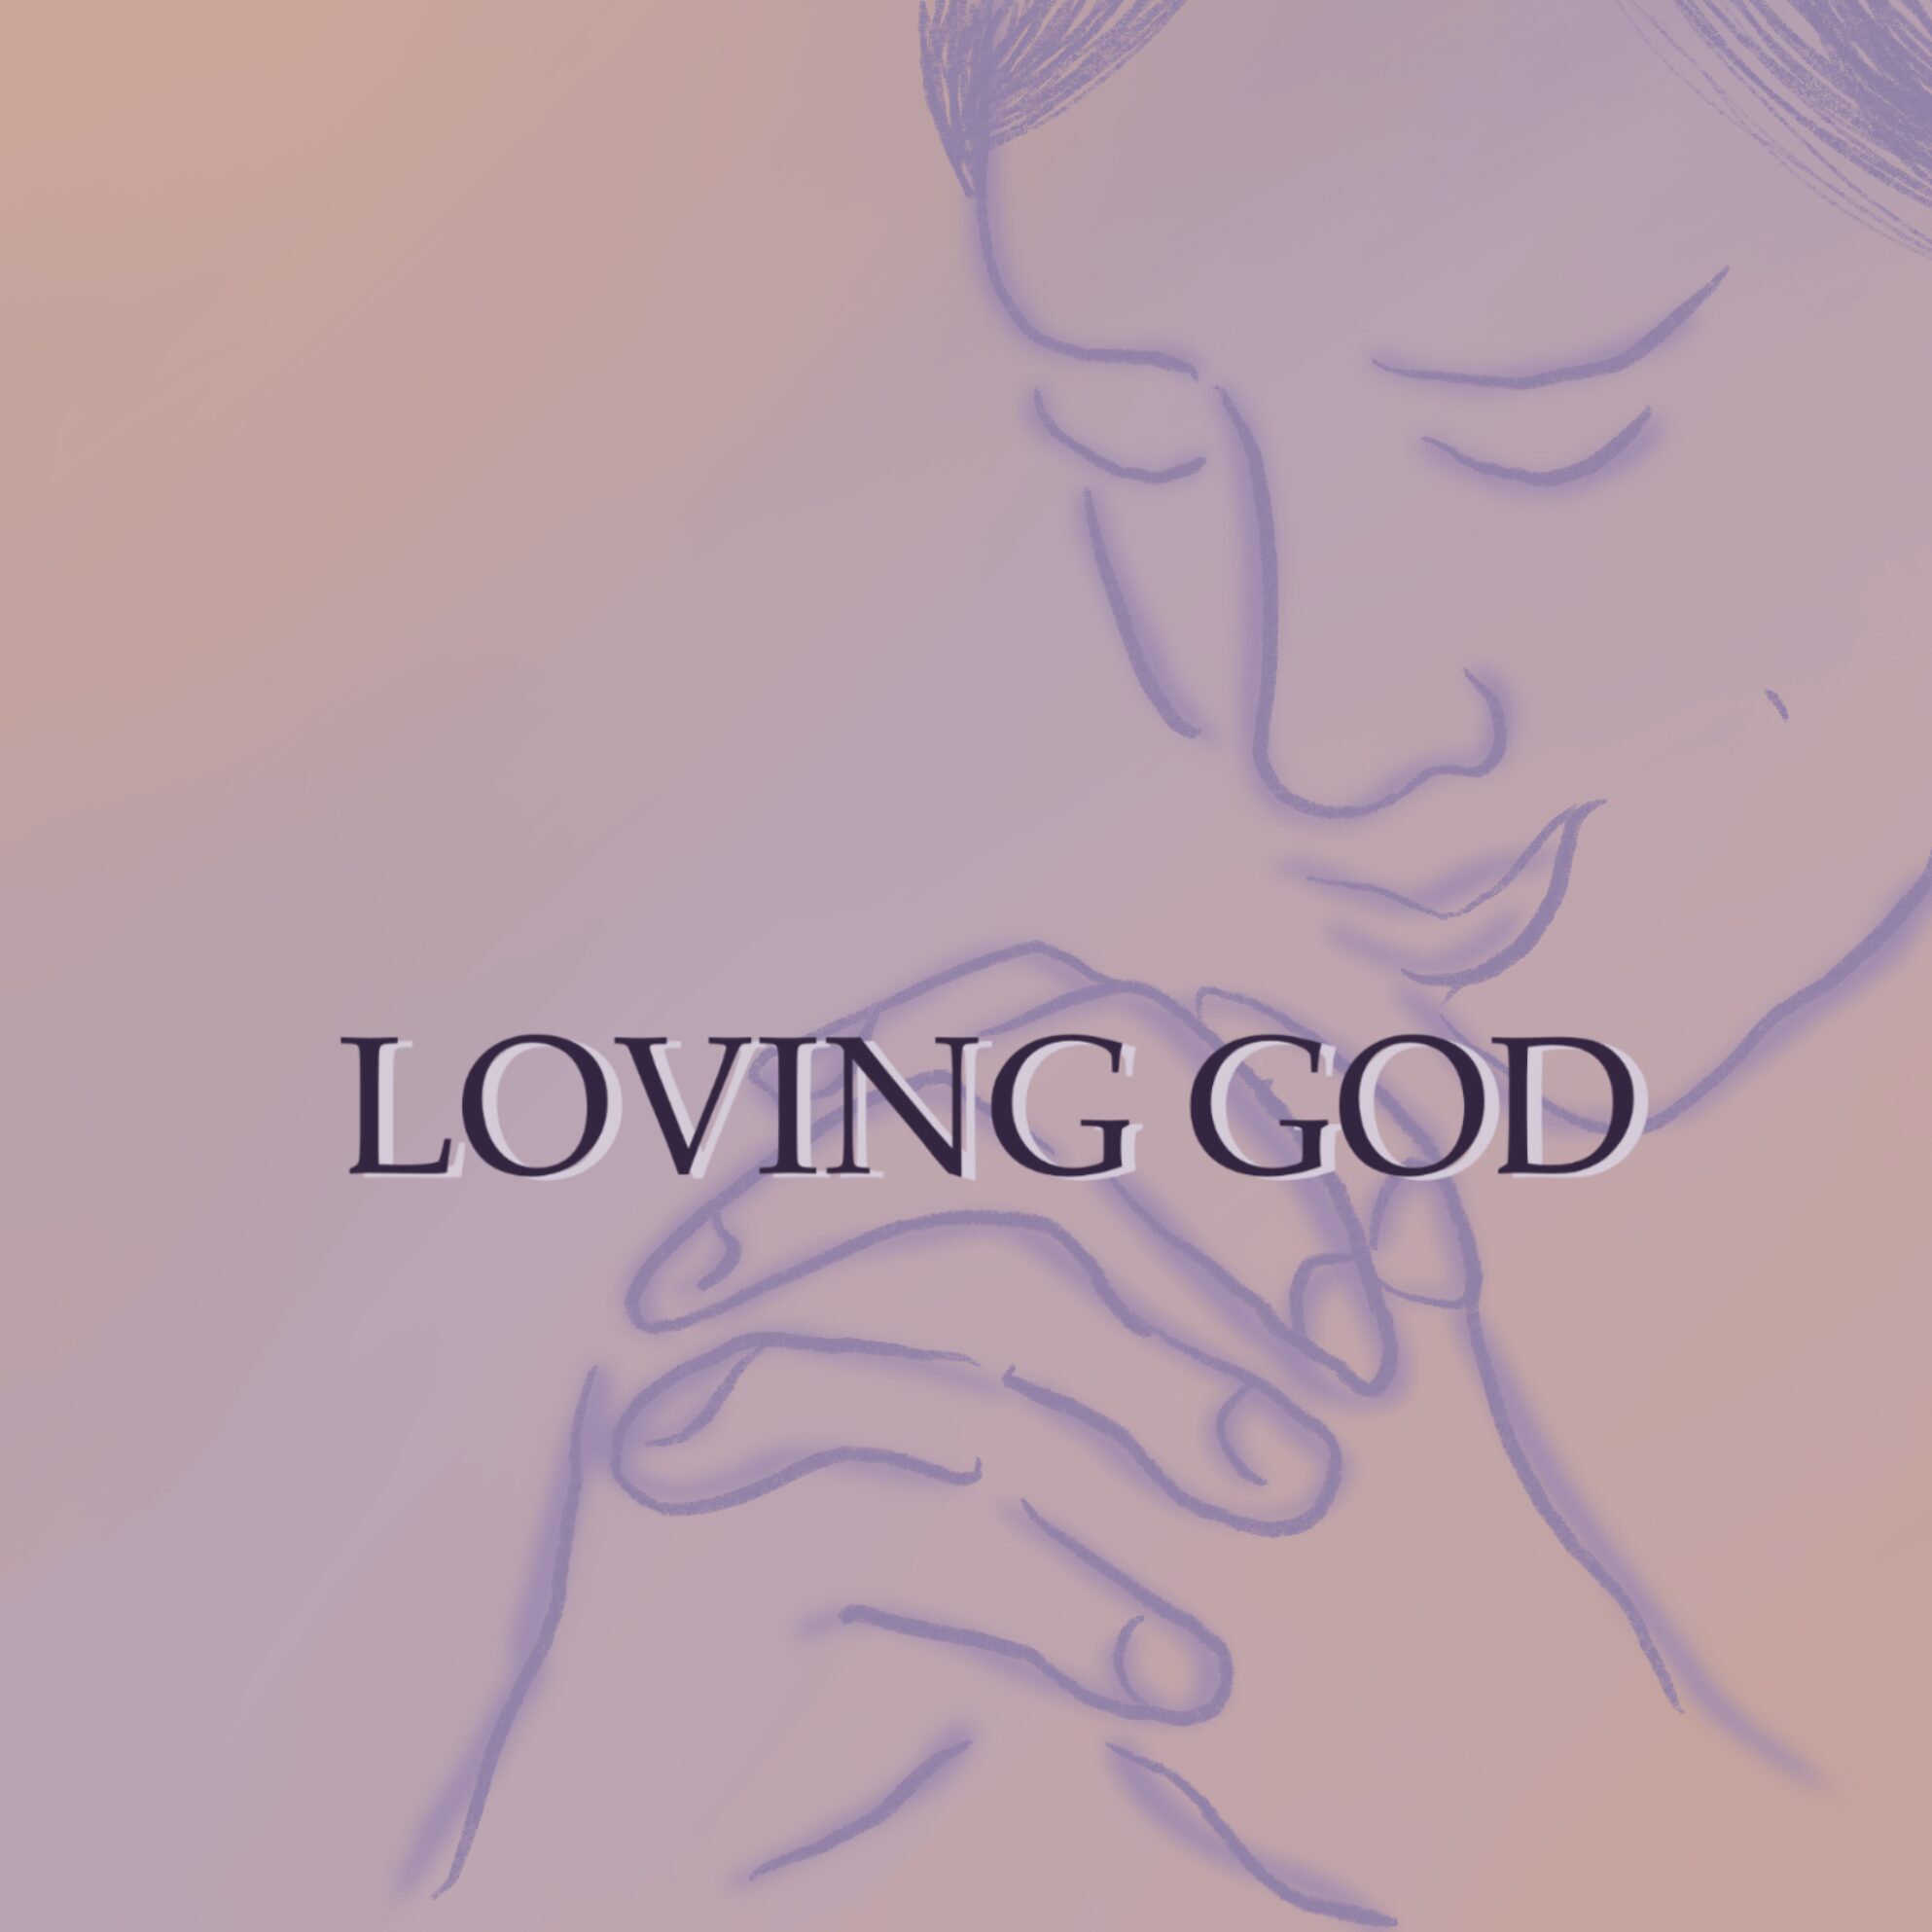 What If Loving God Became Our Pleasure?